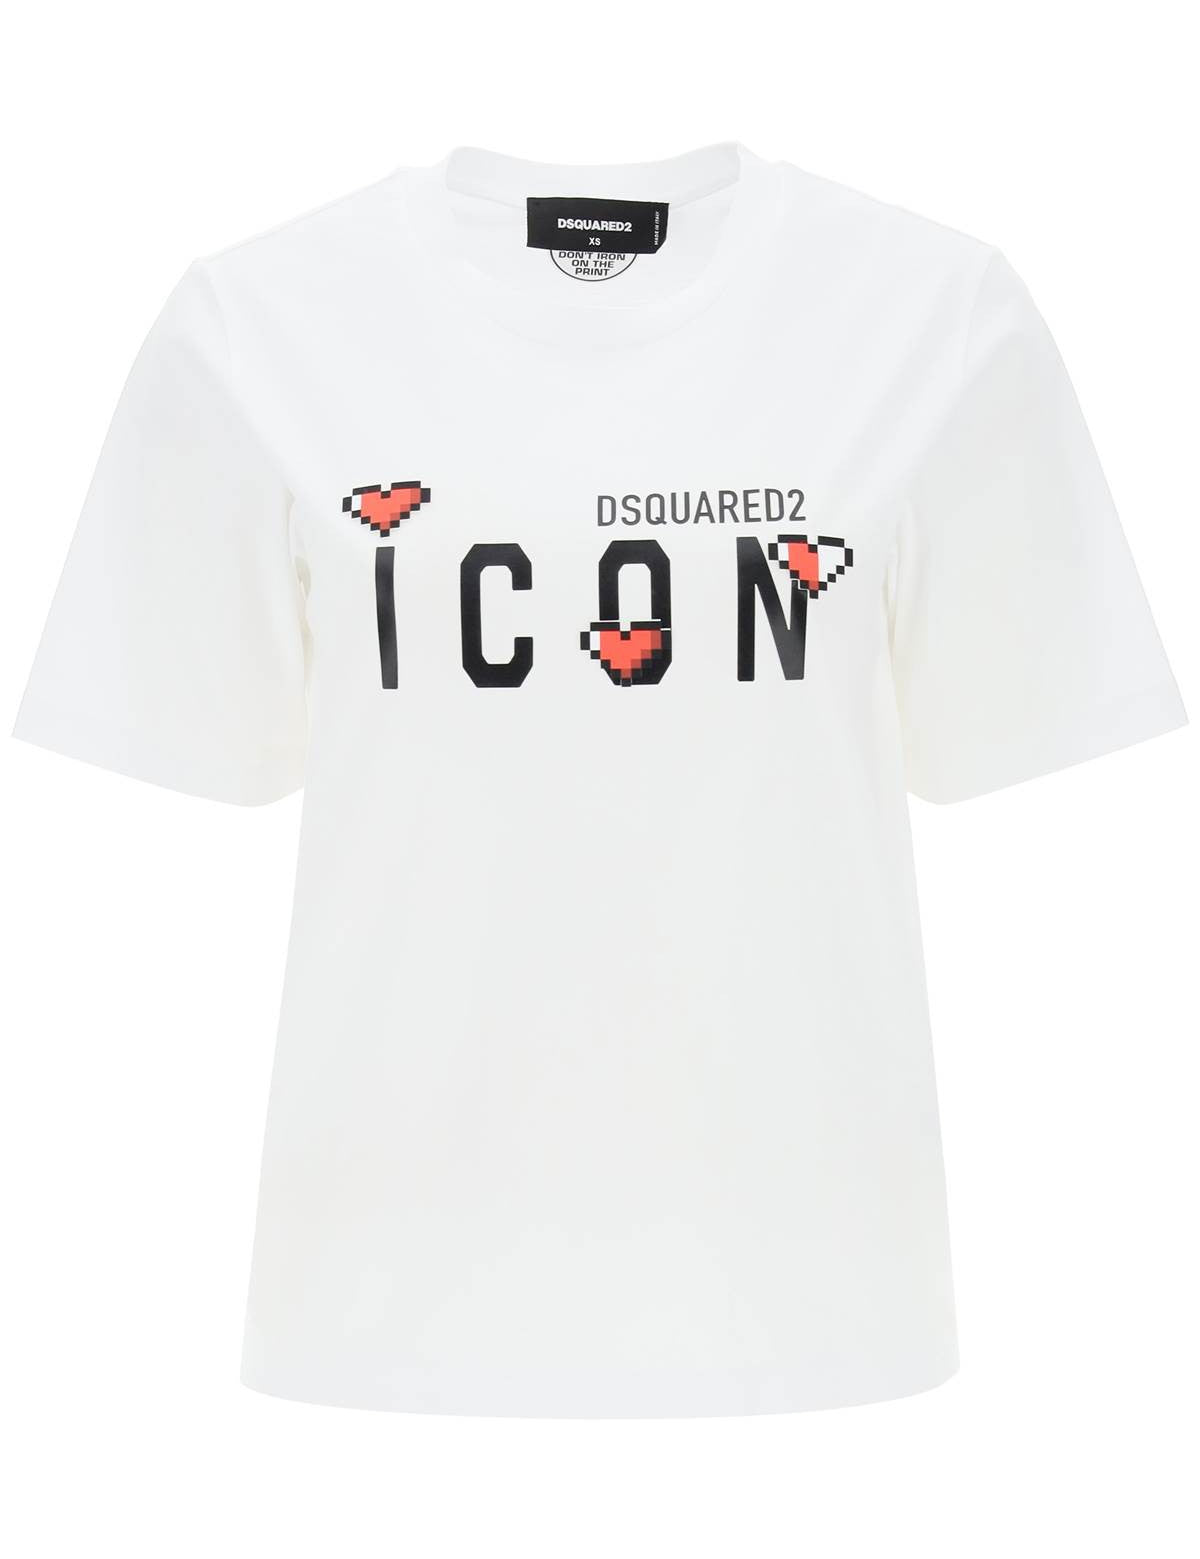 dsquared2-icon-game-lover-t-shirt.jpg